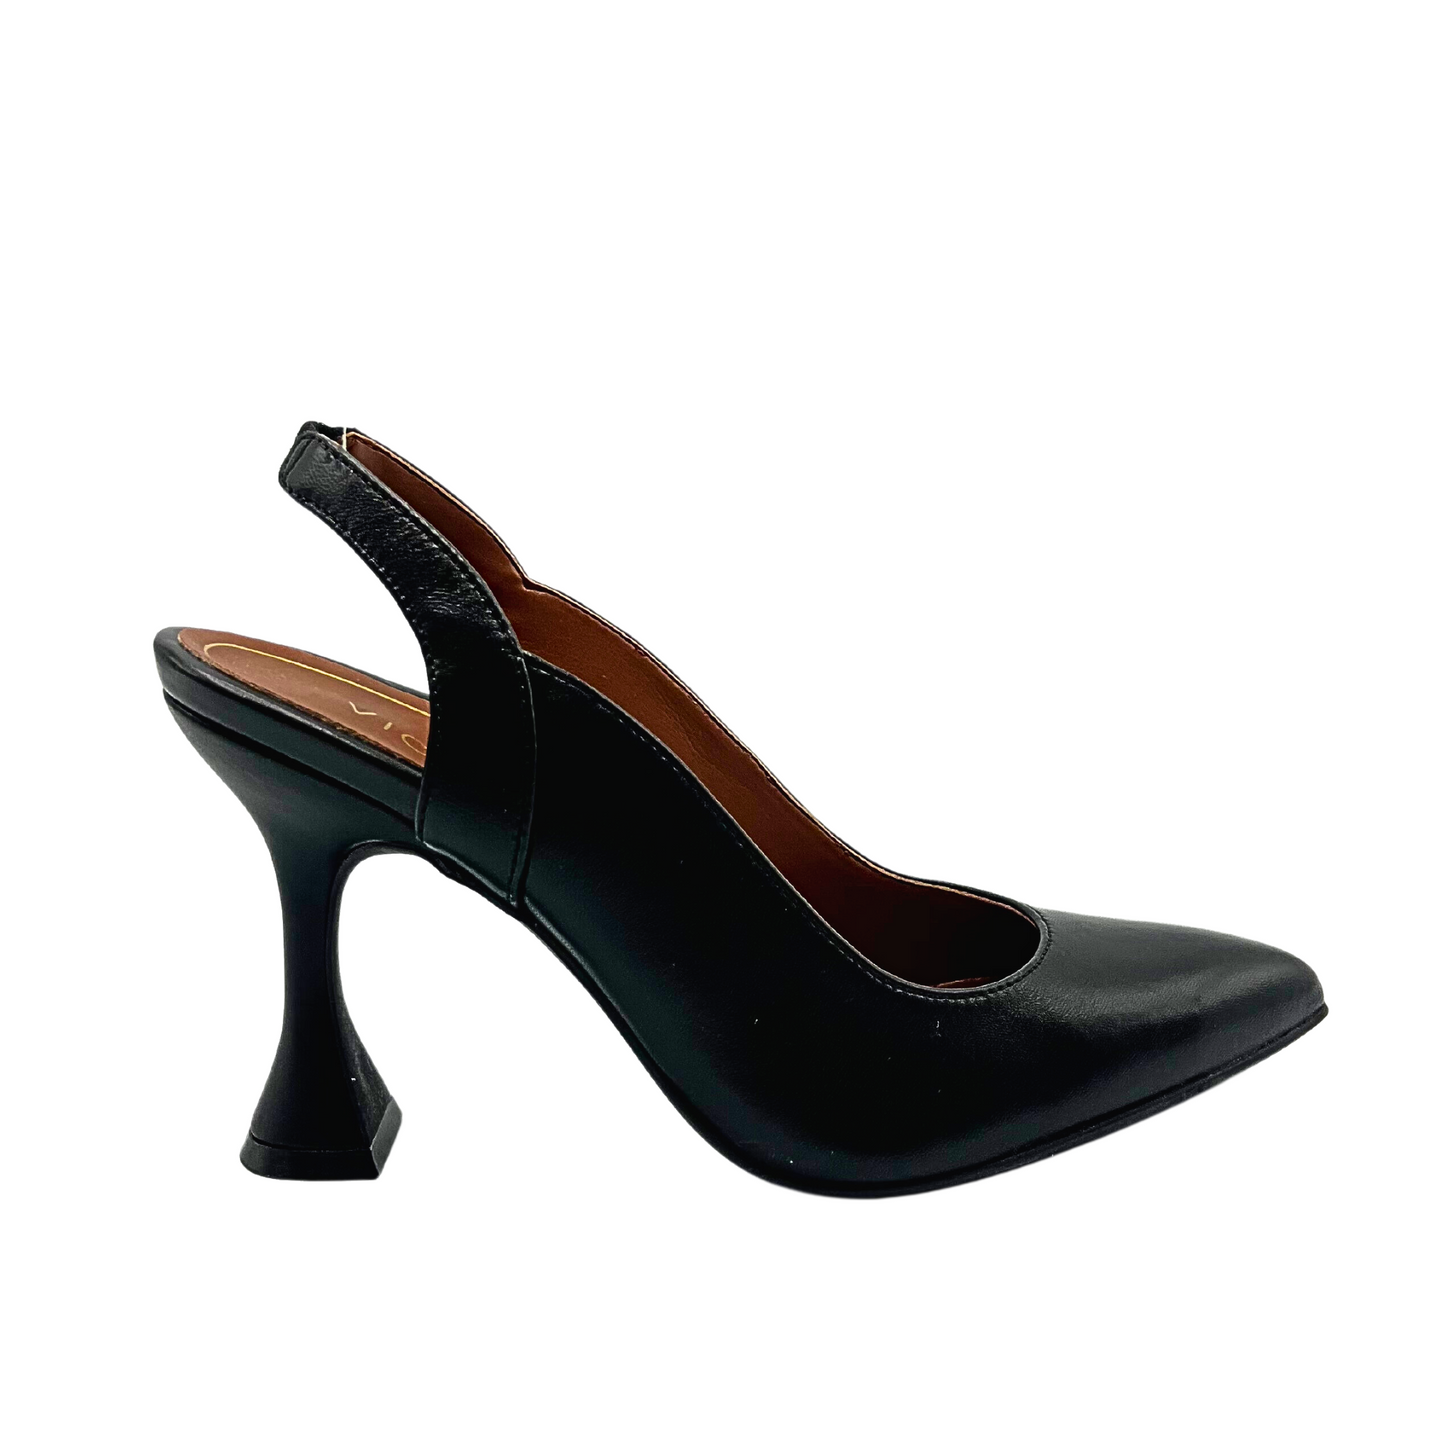 Outside view of black slingback sandal with an hourglass shaped heel